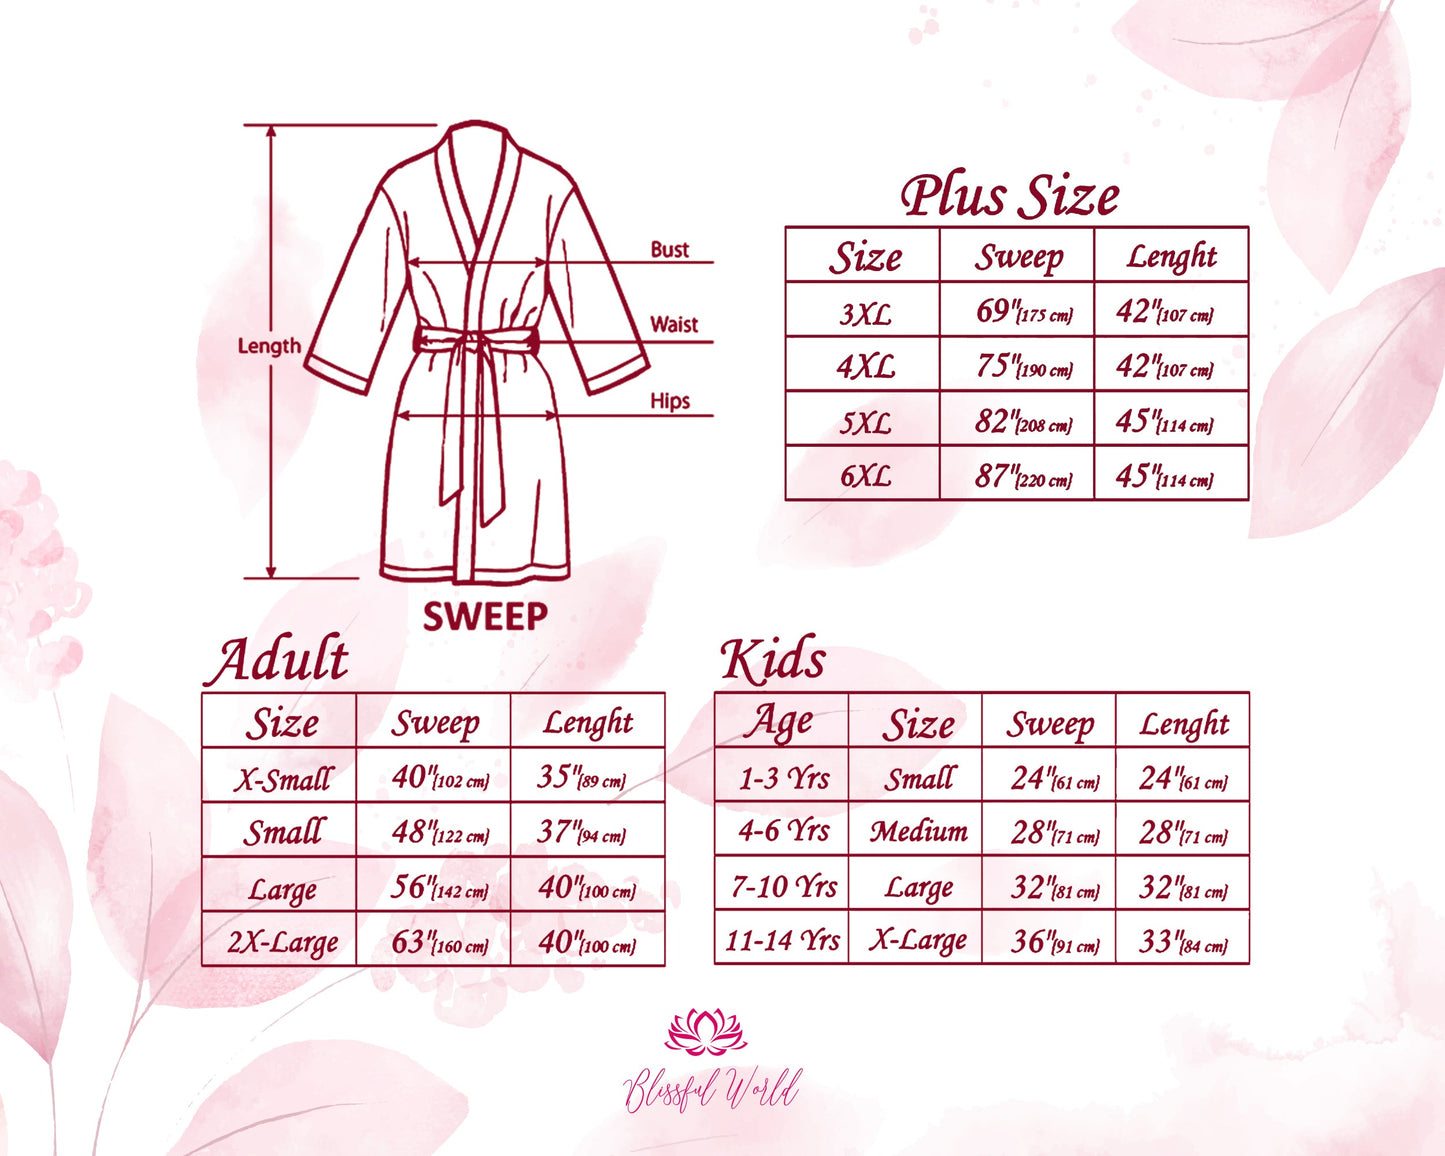 Floral Robes Satin Floral Robes Sunflower Robes Customized New Print Robes Bridesmaid Robe Personalized Robes Custom Robes Bridal Robe Kimono Robes Satin Robe